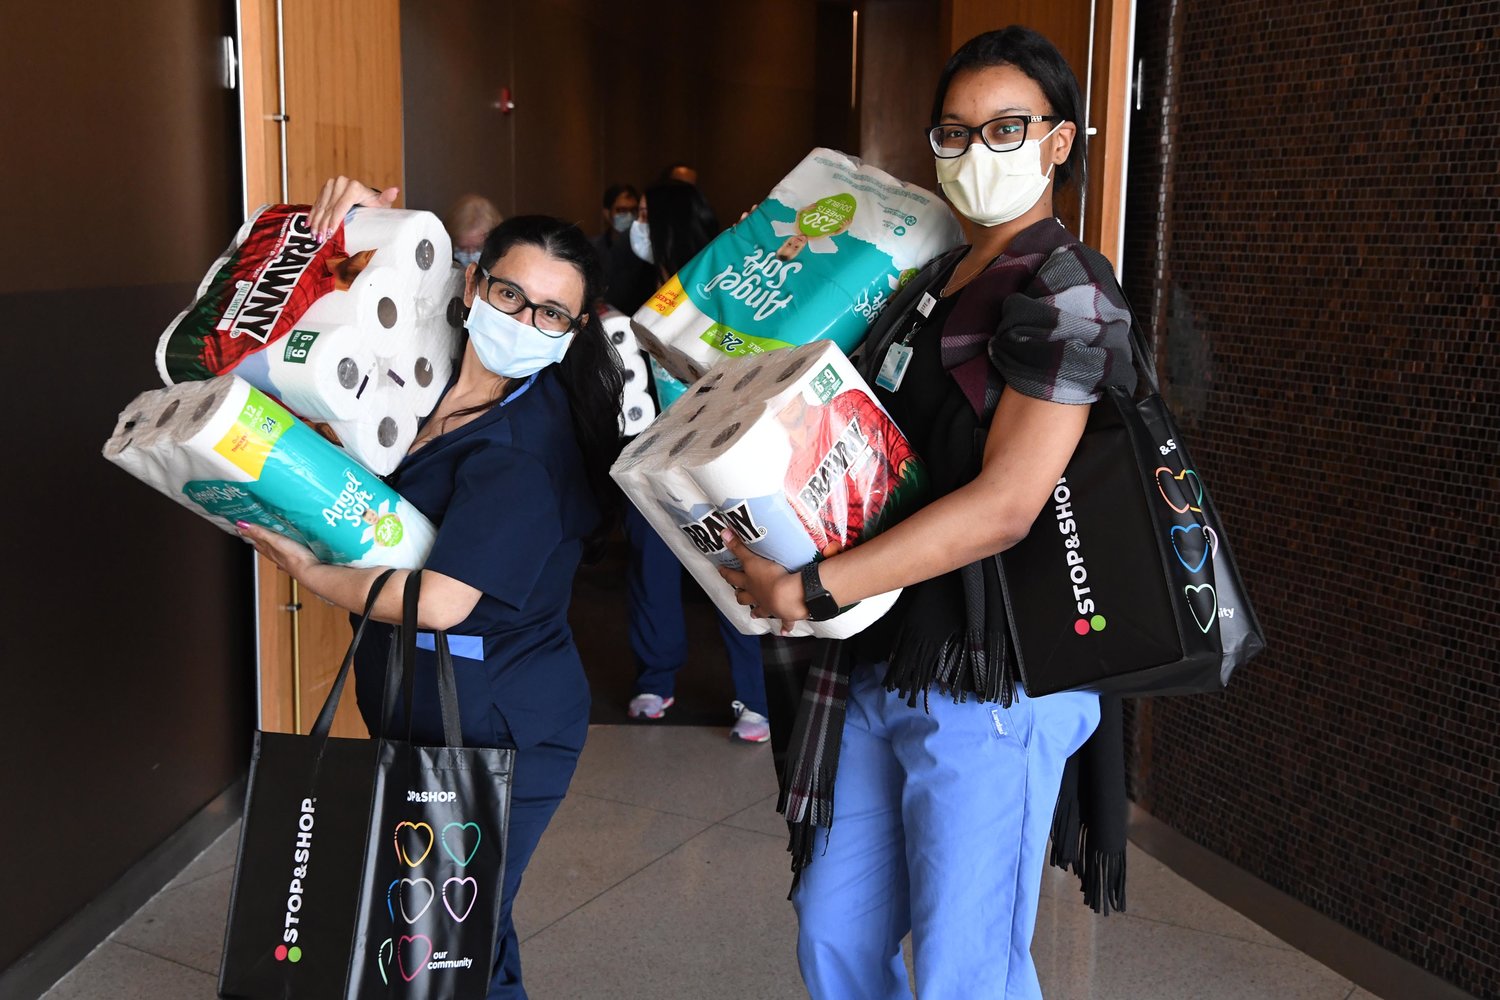 Hospital workers at Mount Sinai South Nassau in Oceanside received paper goods and groceries from Stop & Shop on May 7 in honor of National Nurses Week.